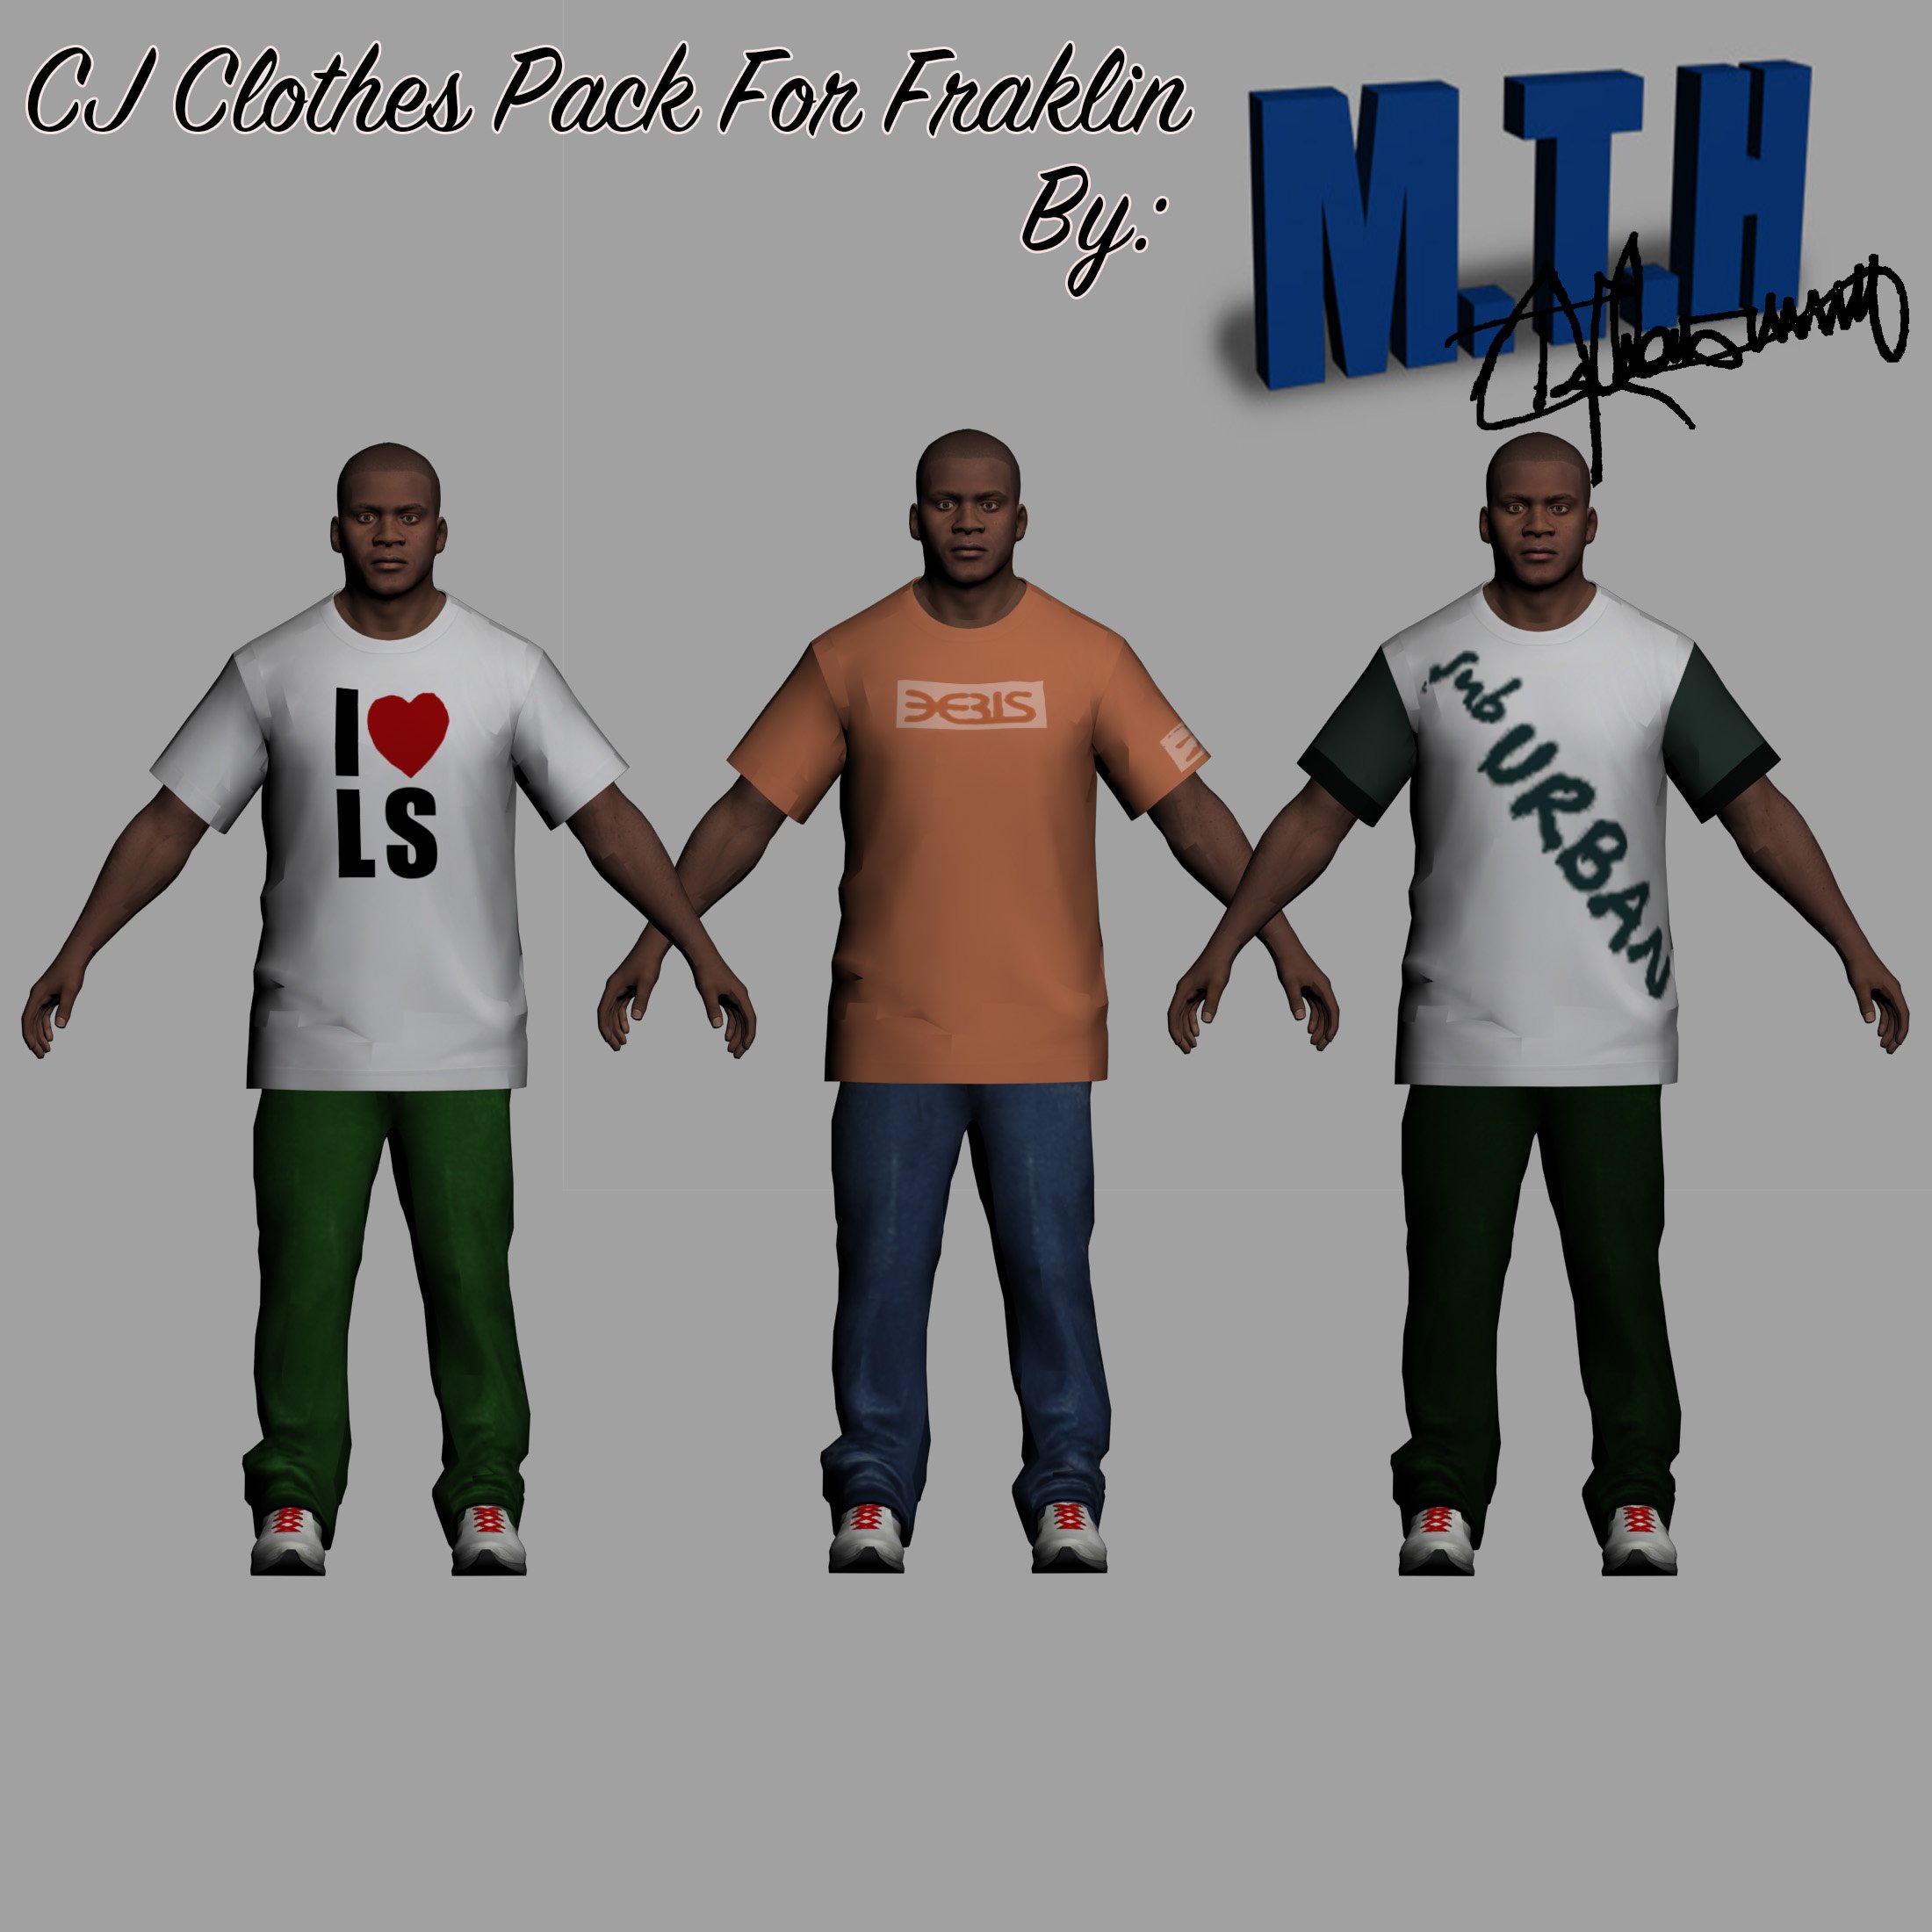 CJ Clothes Pack For Franklin.